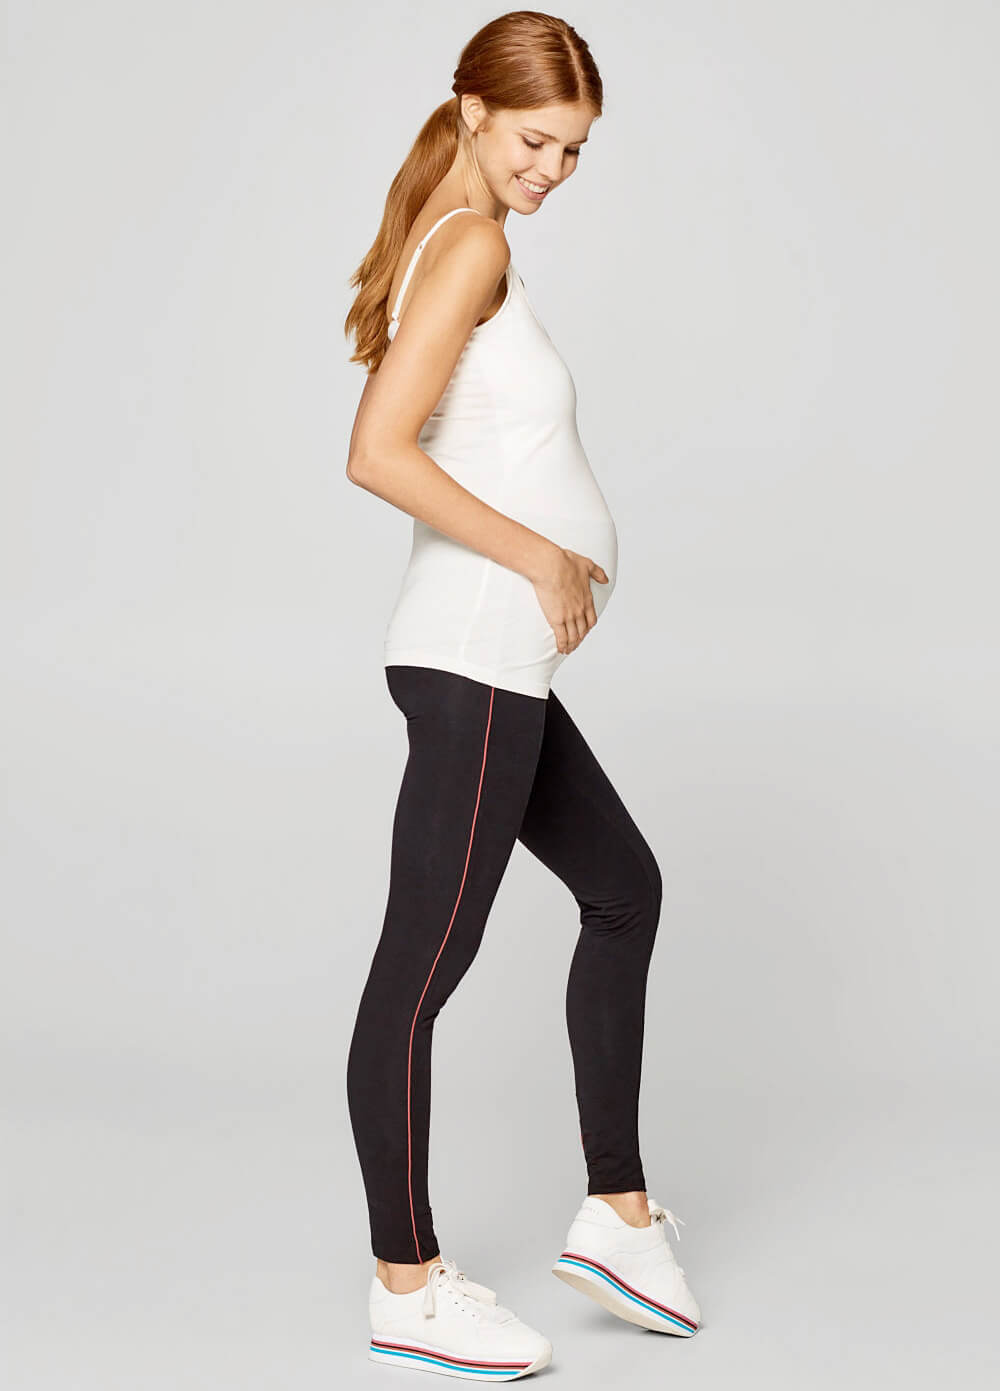 Sporty Piped Maternity Leggings in Black by Esprit